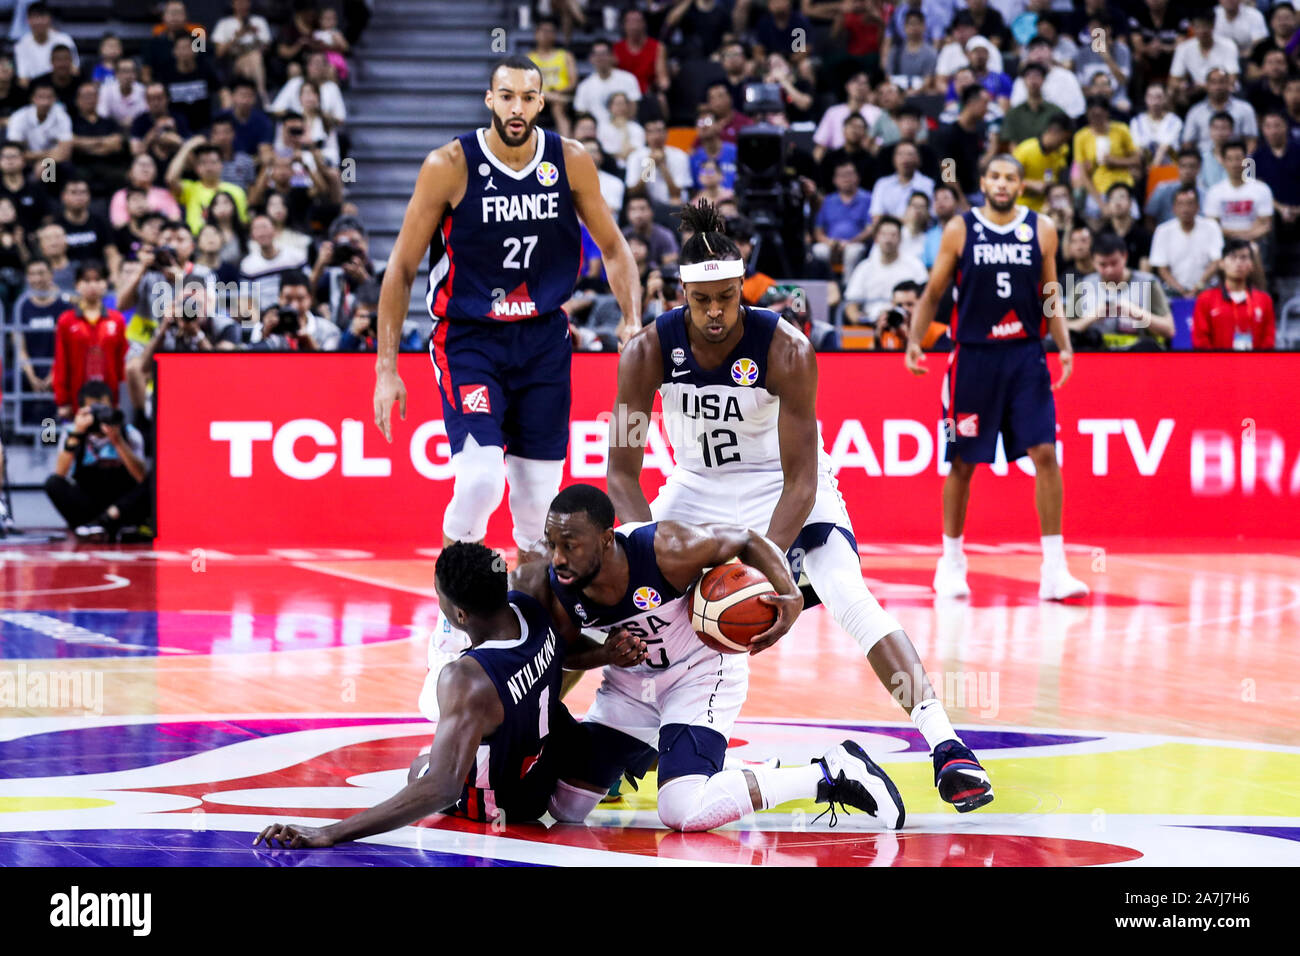 Frank Ntilikina of France, left, and Kemba Walker of the USA, middle,  struggle for the ball during FIBA Basketball World Cup 2019 quarter final  match Stock Photo - Alamy